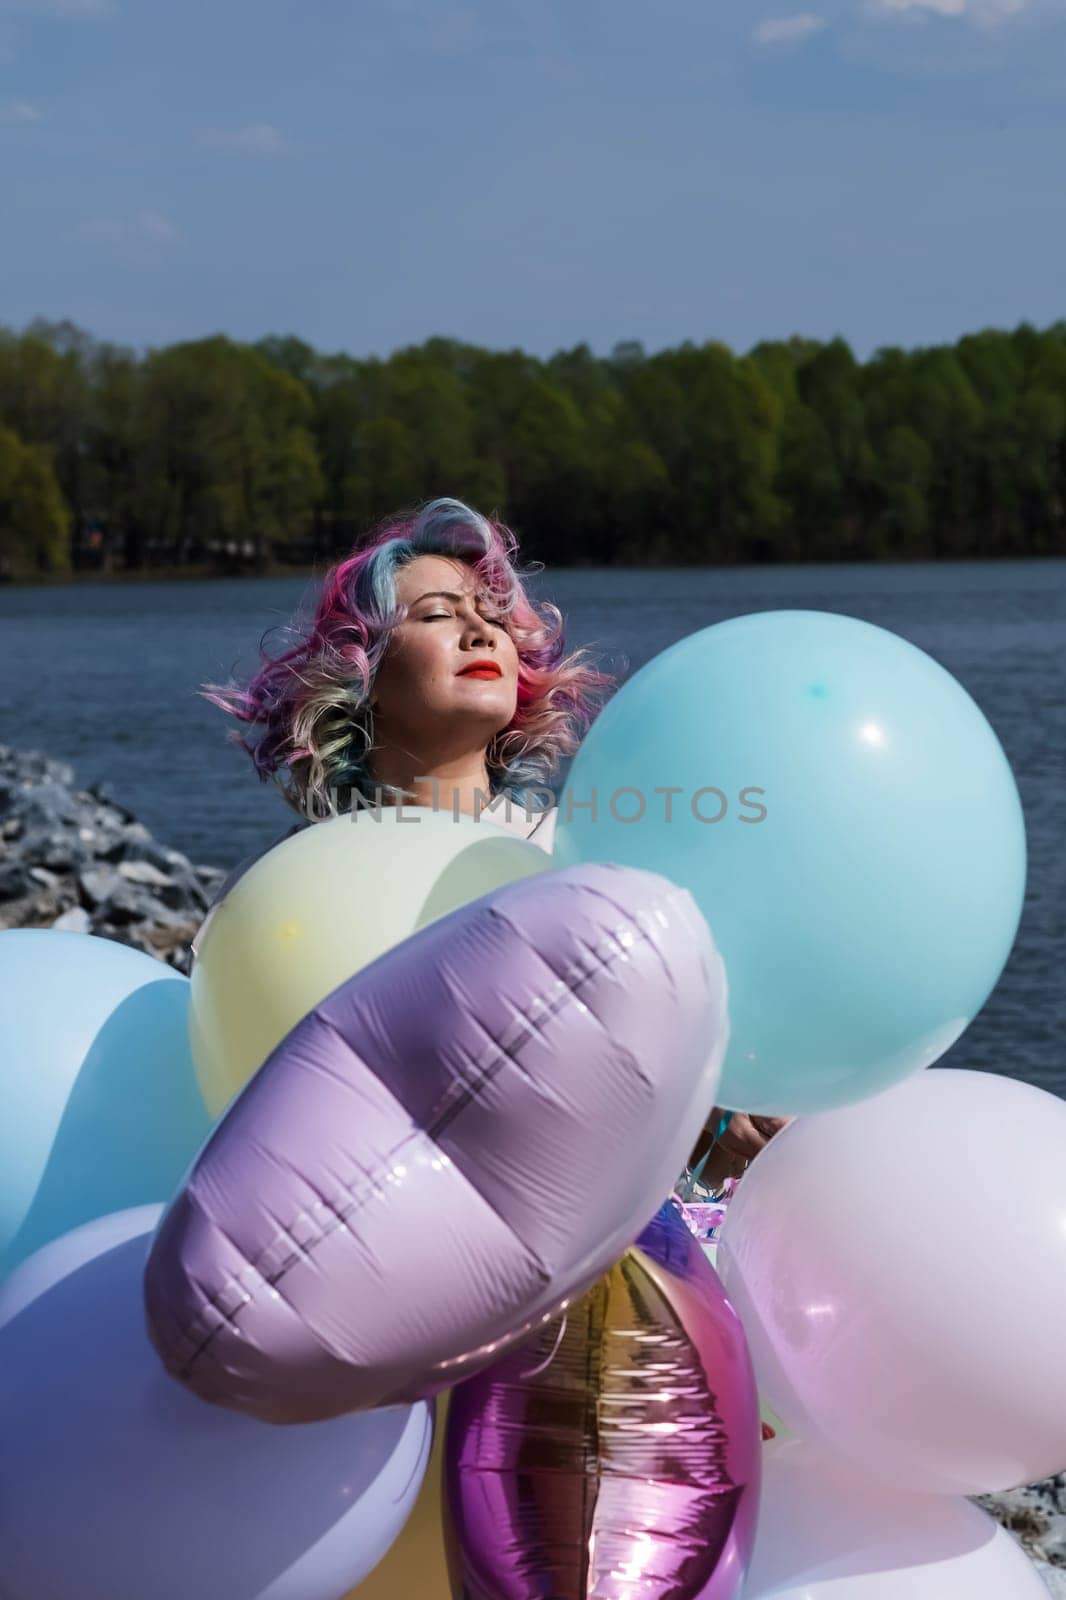 Woman in colored hair walks with an armful of balloons and drinks a refreshing beverage.